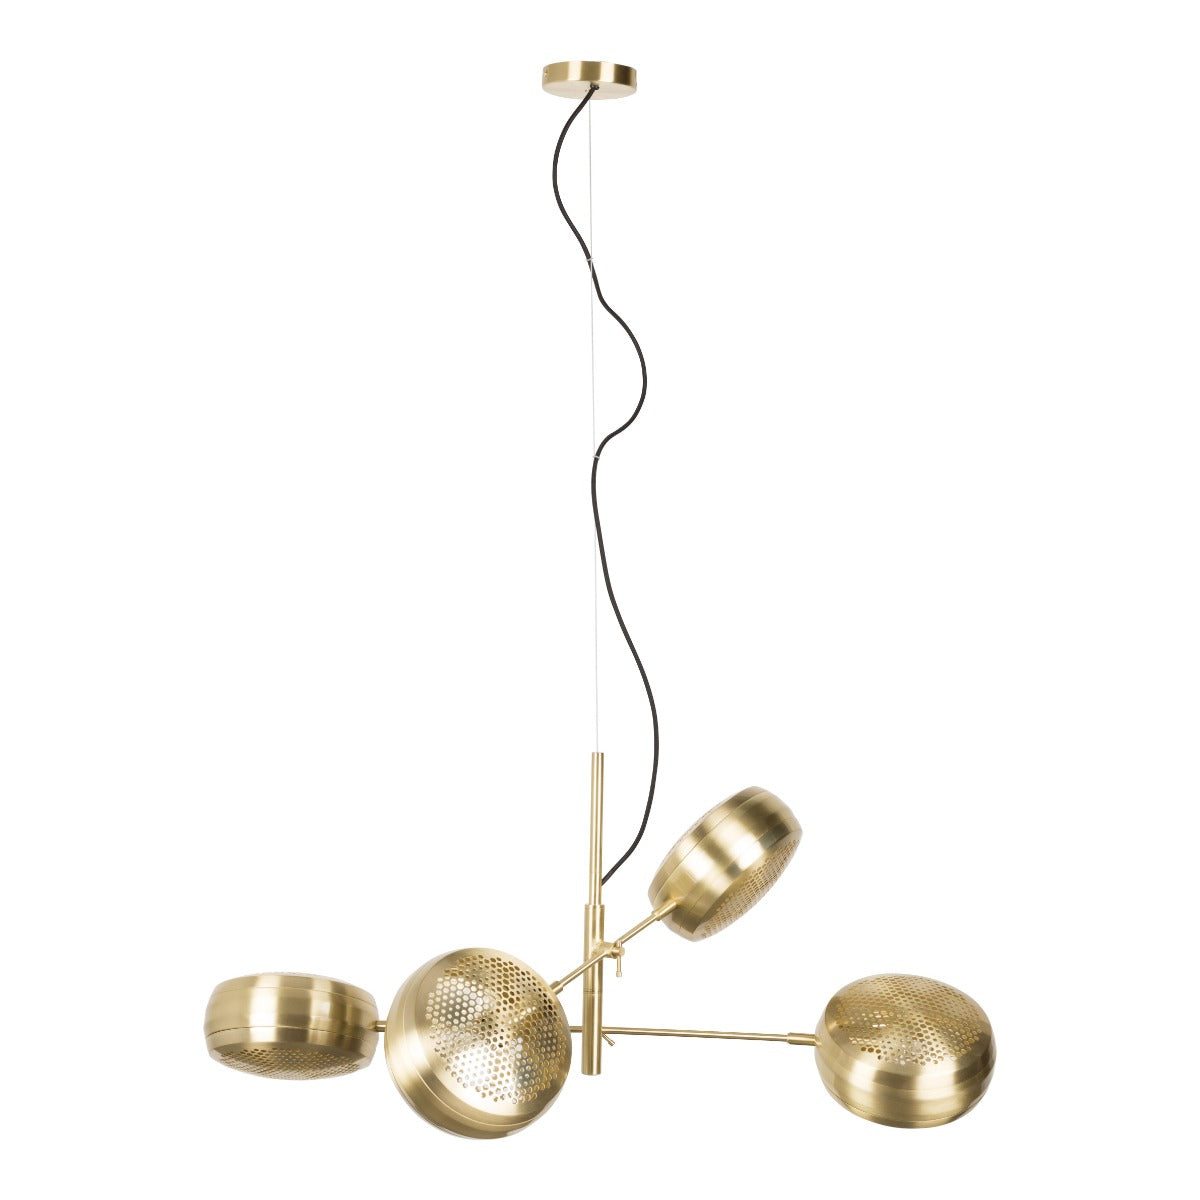 Gringo Multi Brass is a lamp that meets the expectations of everyone, even the most demanding fans of light at home. Four balls, with honey -shaped cutouts, will complement any modern interior of the living room, office or bedroom. The brass execution of the chandelier with a black cable that allows you to choose the right height, looks very elegant.